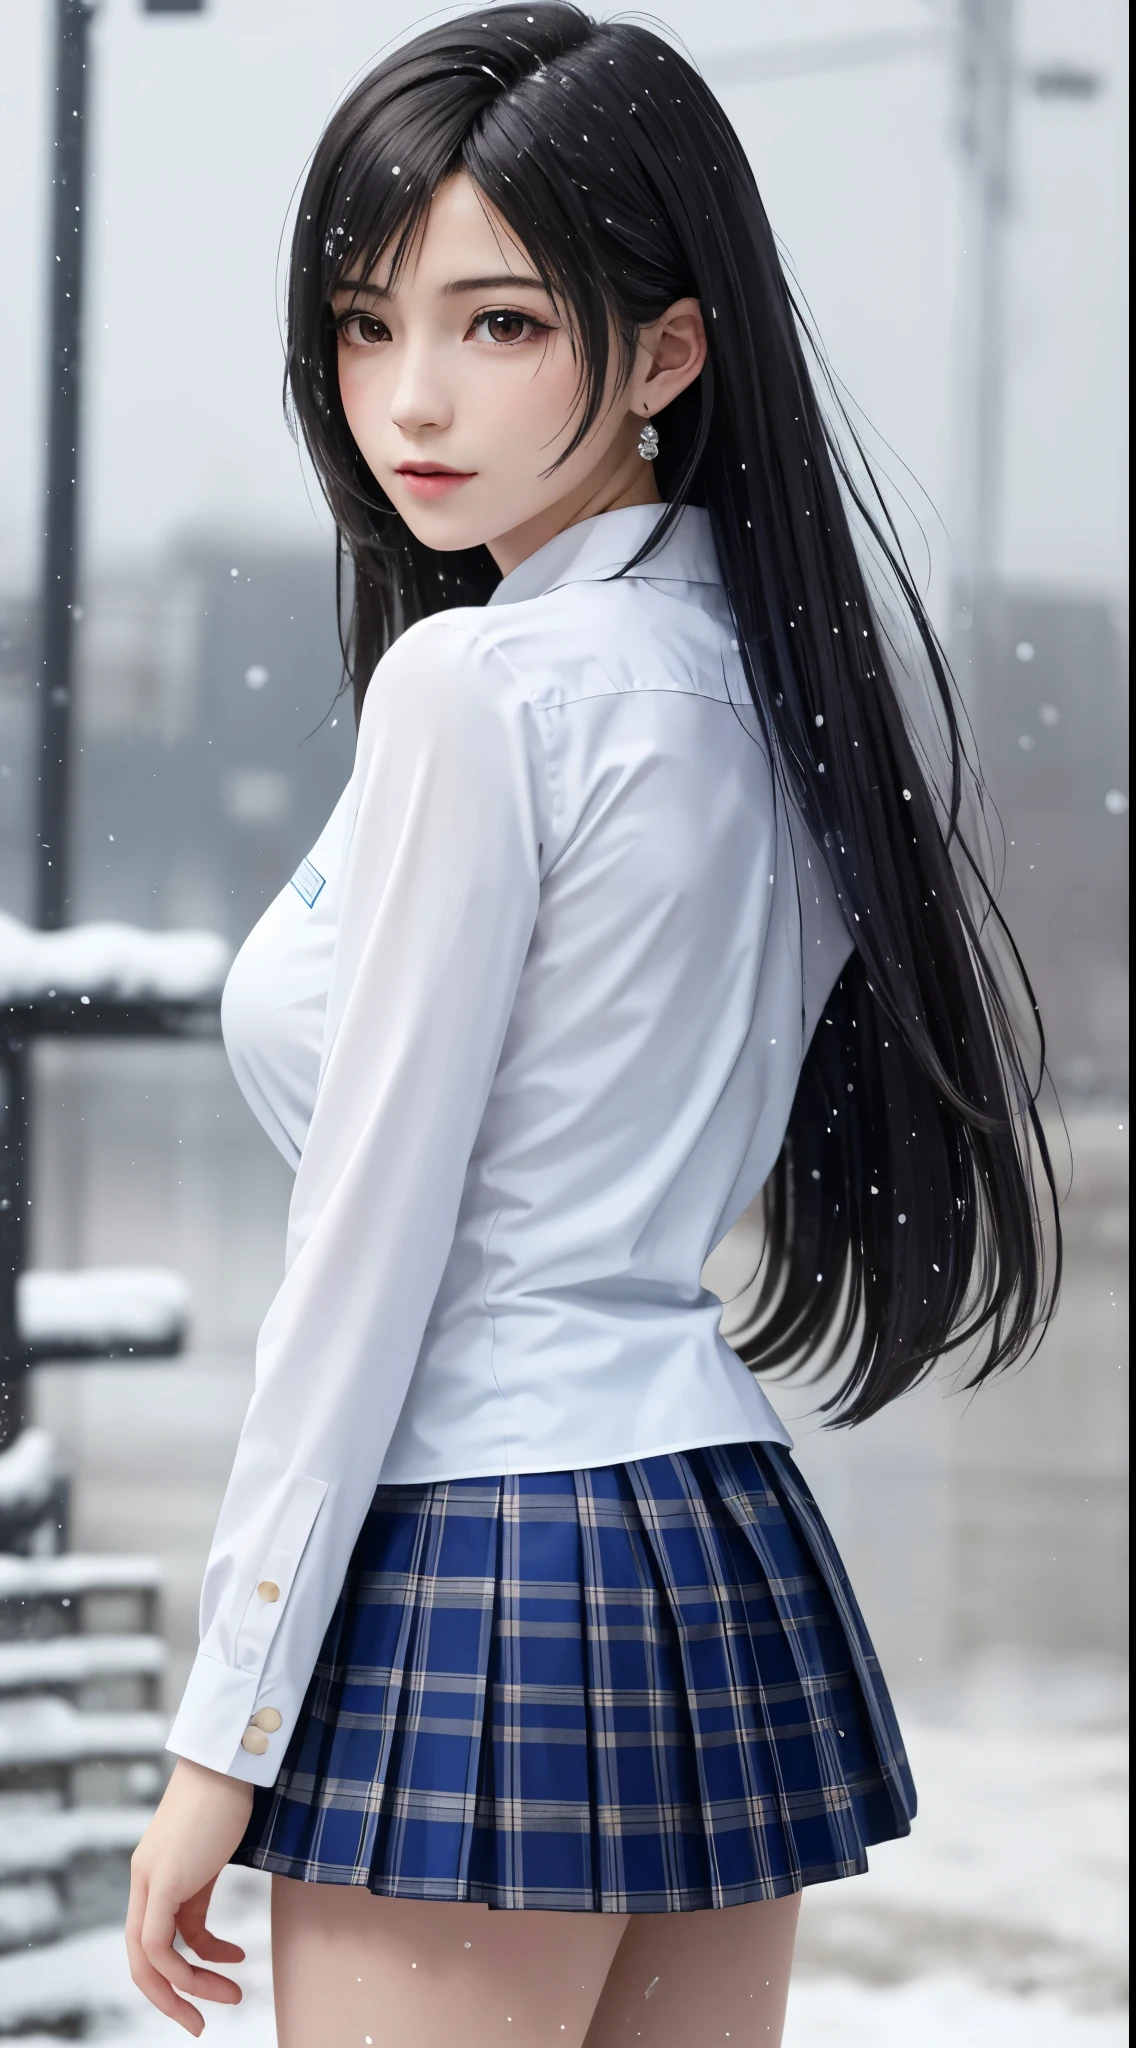 (top quality, masutepiece: 1.1), (Realistic: 1.3), (photoRealistic: 1.3),wallpapers, BREAK (((FF7,Tifa_lockhart))),(((Thick loose knit scarf))),(((Japan jk uniform,Navy Blue blazer,long-sleeved,Navy Blue Plaid Pleated mini-Skirt,Dark blue short socks,loafers))),(background big city,shibuya:1.1,hard snow:1.3,neon:1.2),(gravure pose:1.3,nogizaka idol),Ultra-detailed face, Detailed eyes,Red eyes, BREAK (((FF7,Tifa_lockhart))),(black brown hair, Large breasts: 1.0), BREAK , About 18 years old,kawaii,(calf focus:1.2,back hair:1.2),sensual,zettai_ryouiki:1.1,looking at viewer,Beautiful legs,walking,wet body:1.3,Heavy snow ,(snow-drenched body: 1.3), (Bodysuit with water droplets: 1.3), (snow-soaked hair: 1.3) , (snow-soaked bangs: 1.3), (snow-soaked shirt: 1.3) , In the snow,Snow falls,(face focus:1.2,face close up:1.2)